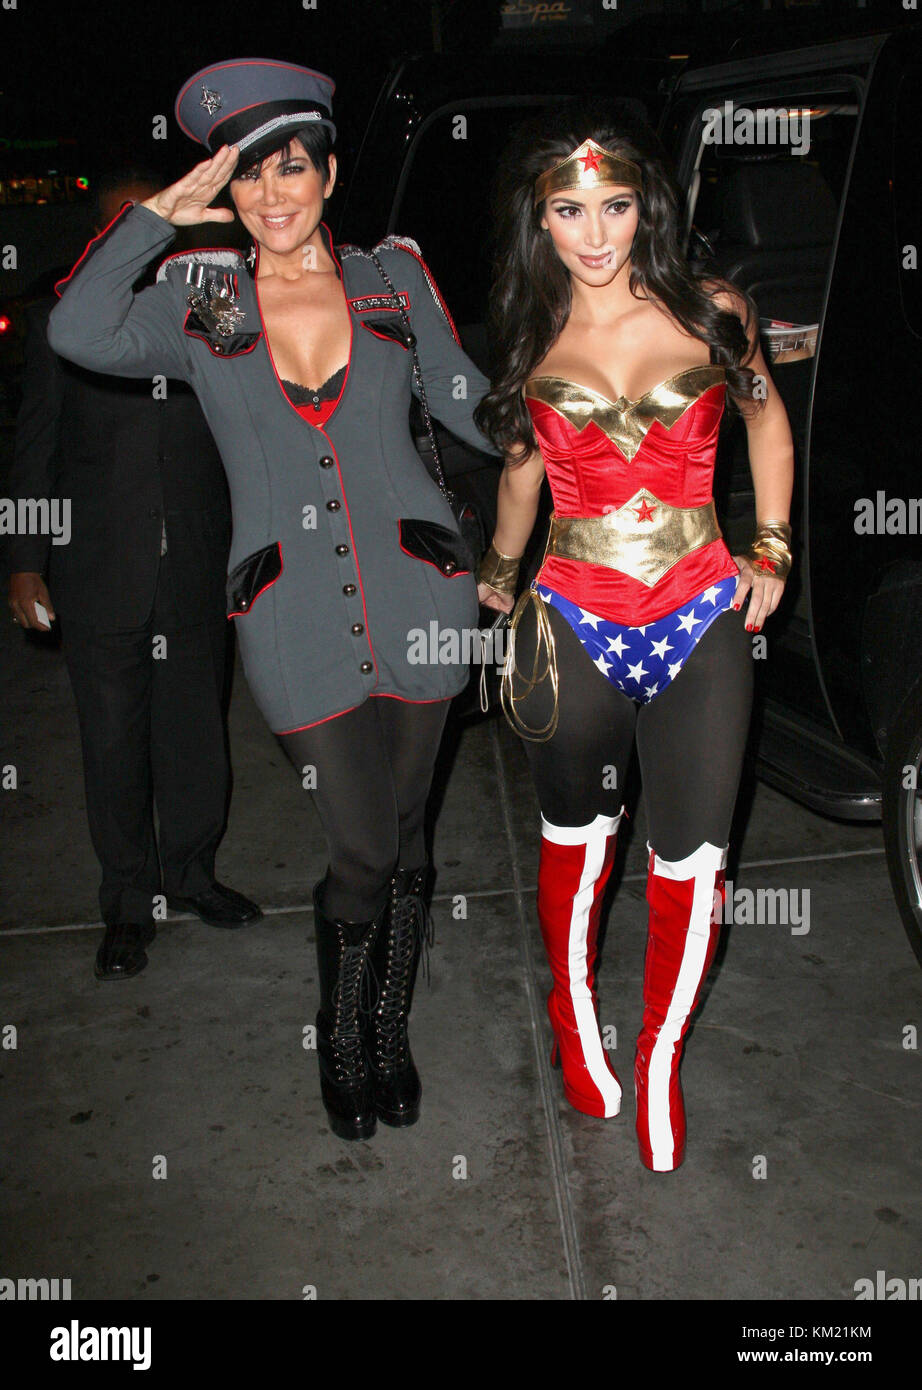 SMG_LA1_Kim Kardashian_Halloween_103008_01  LOS ANGELES, CA - OCTOBER 30: Kim Kardashian and mon Kris Jenner arrive to her Halloween party hosted by PAMA at Stone Rose on October 30, 2008 in Los Angeles, California (Photo By Storms Media Group)  People:    Kim Kardashian, Kris Jenner Stock Photo